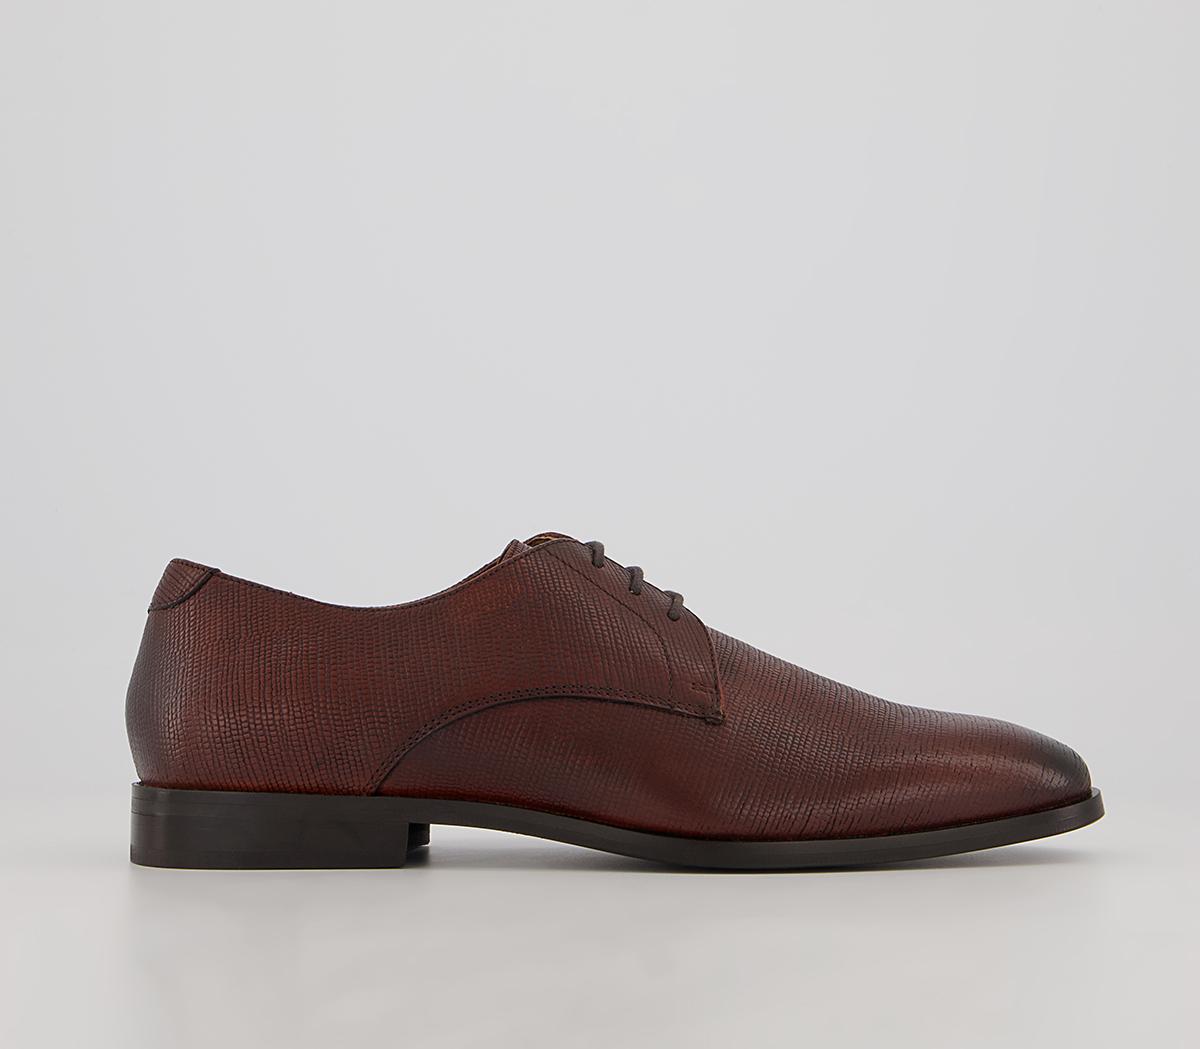 Walk LondonFlorence Etched Derby ShoesBrown